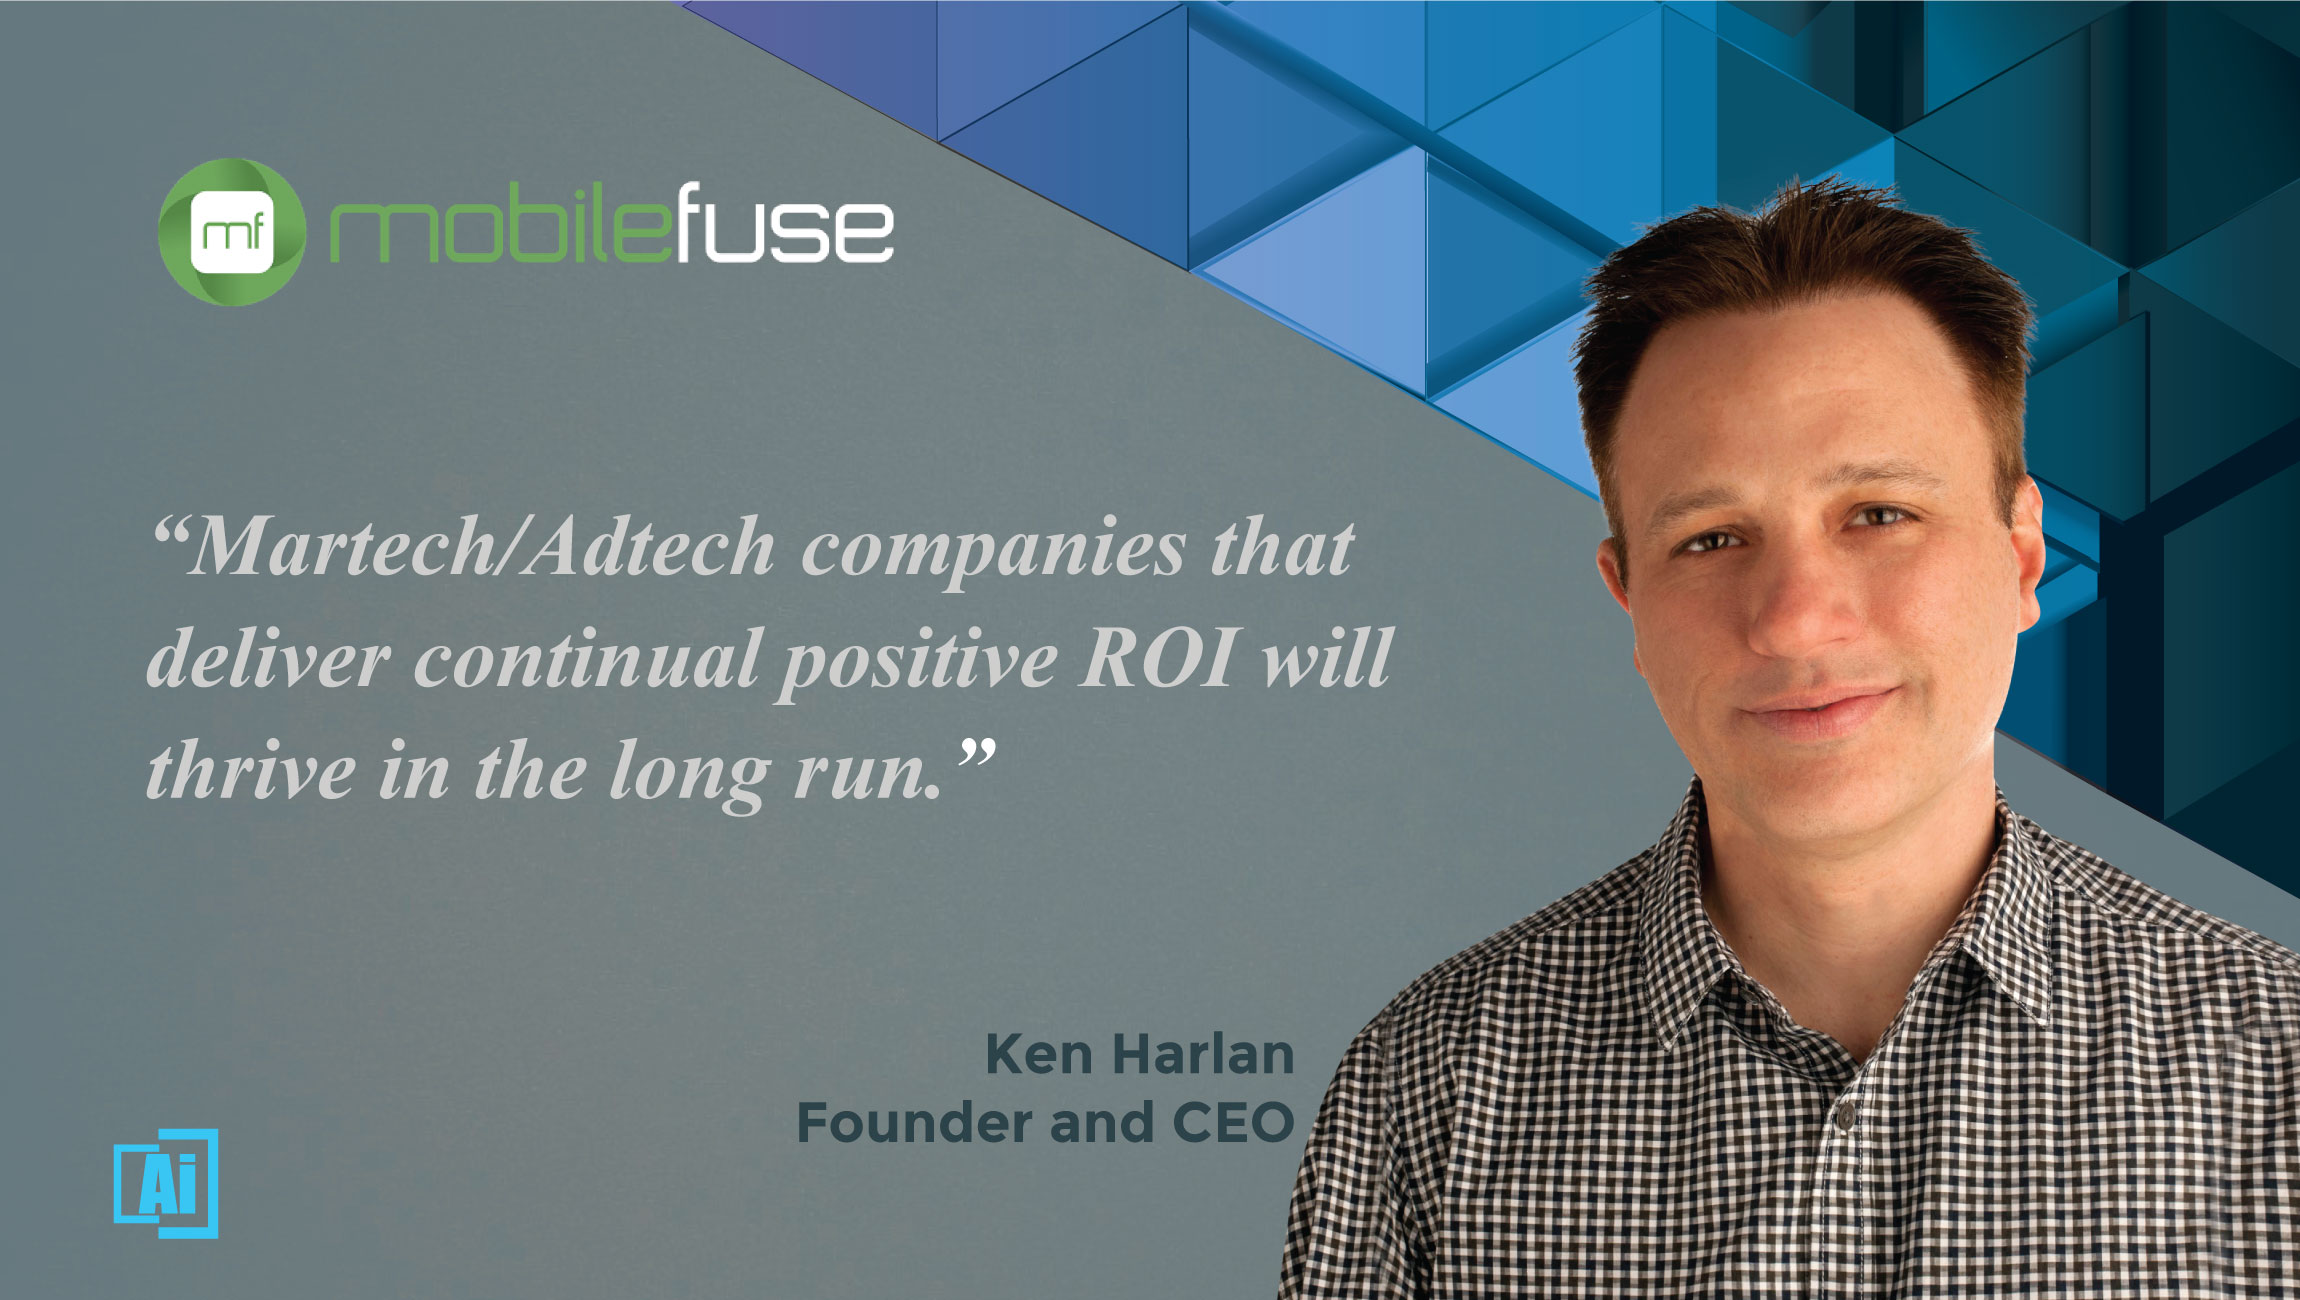 Ken Harlan, Founder and CEO at MobileFuse